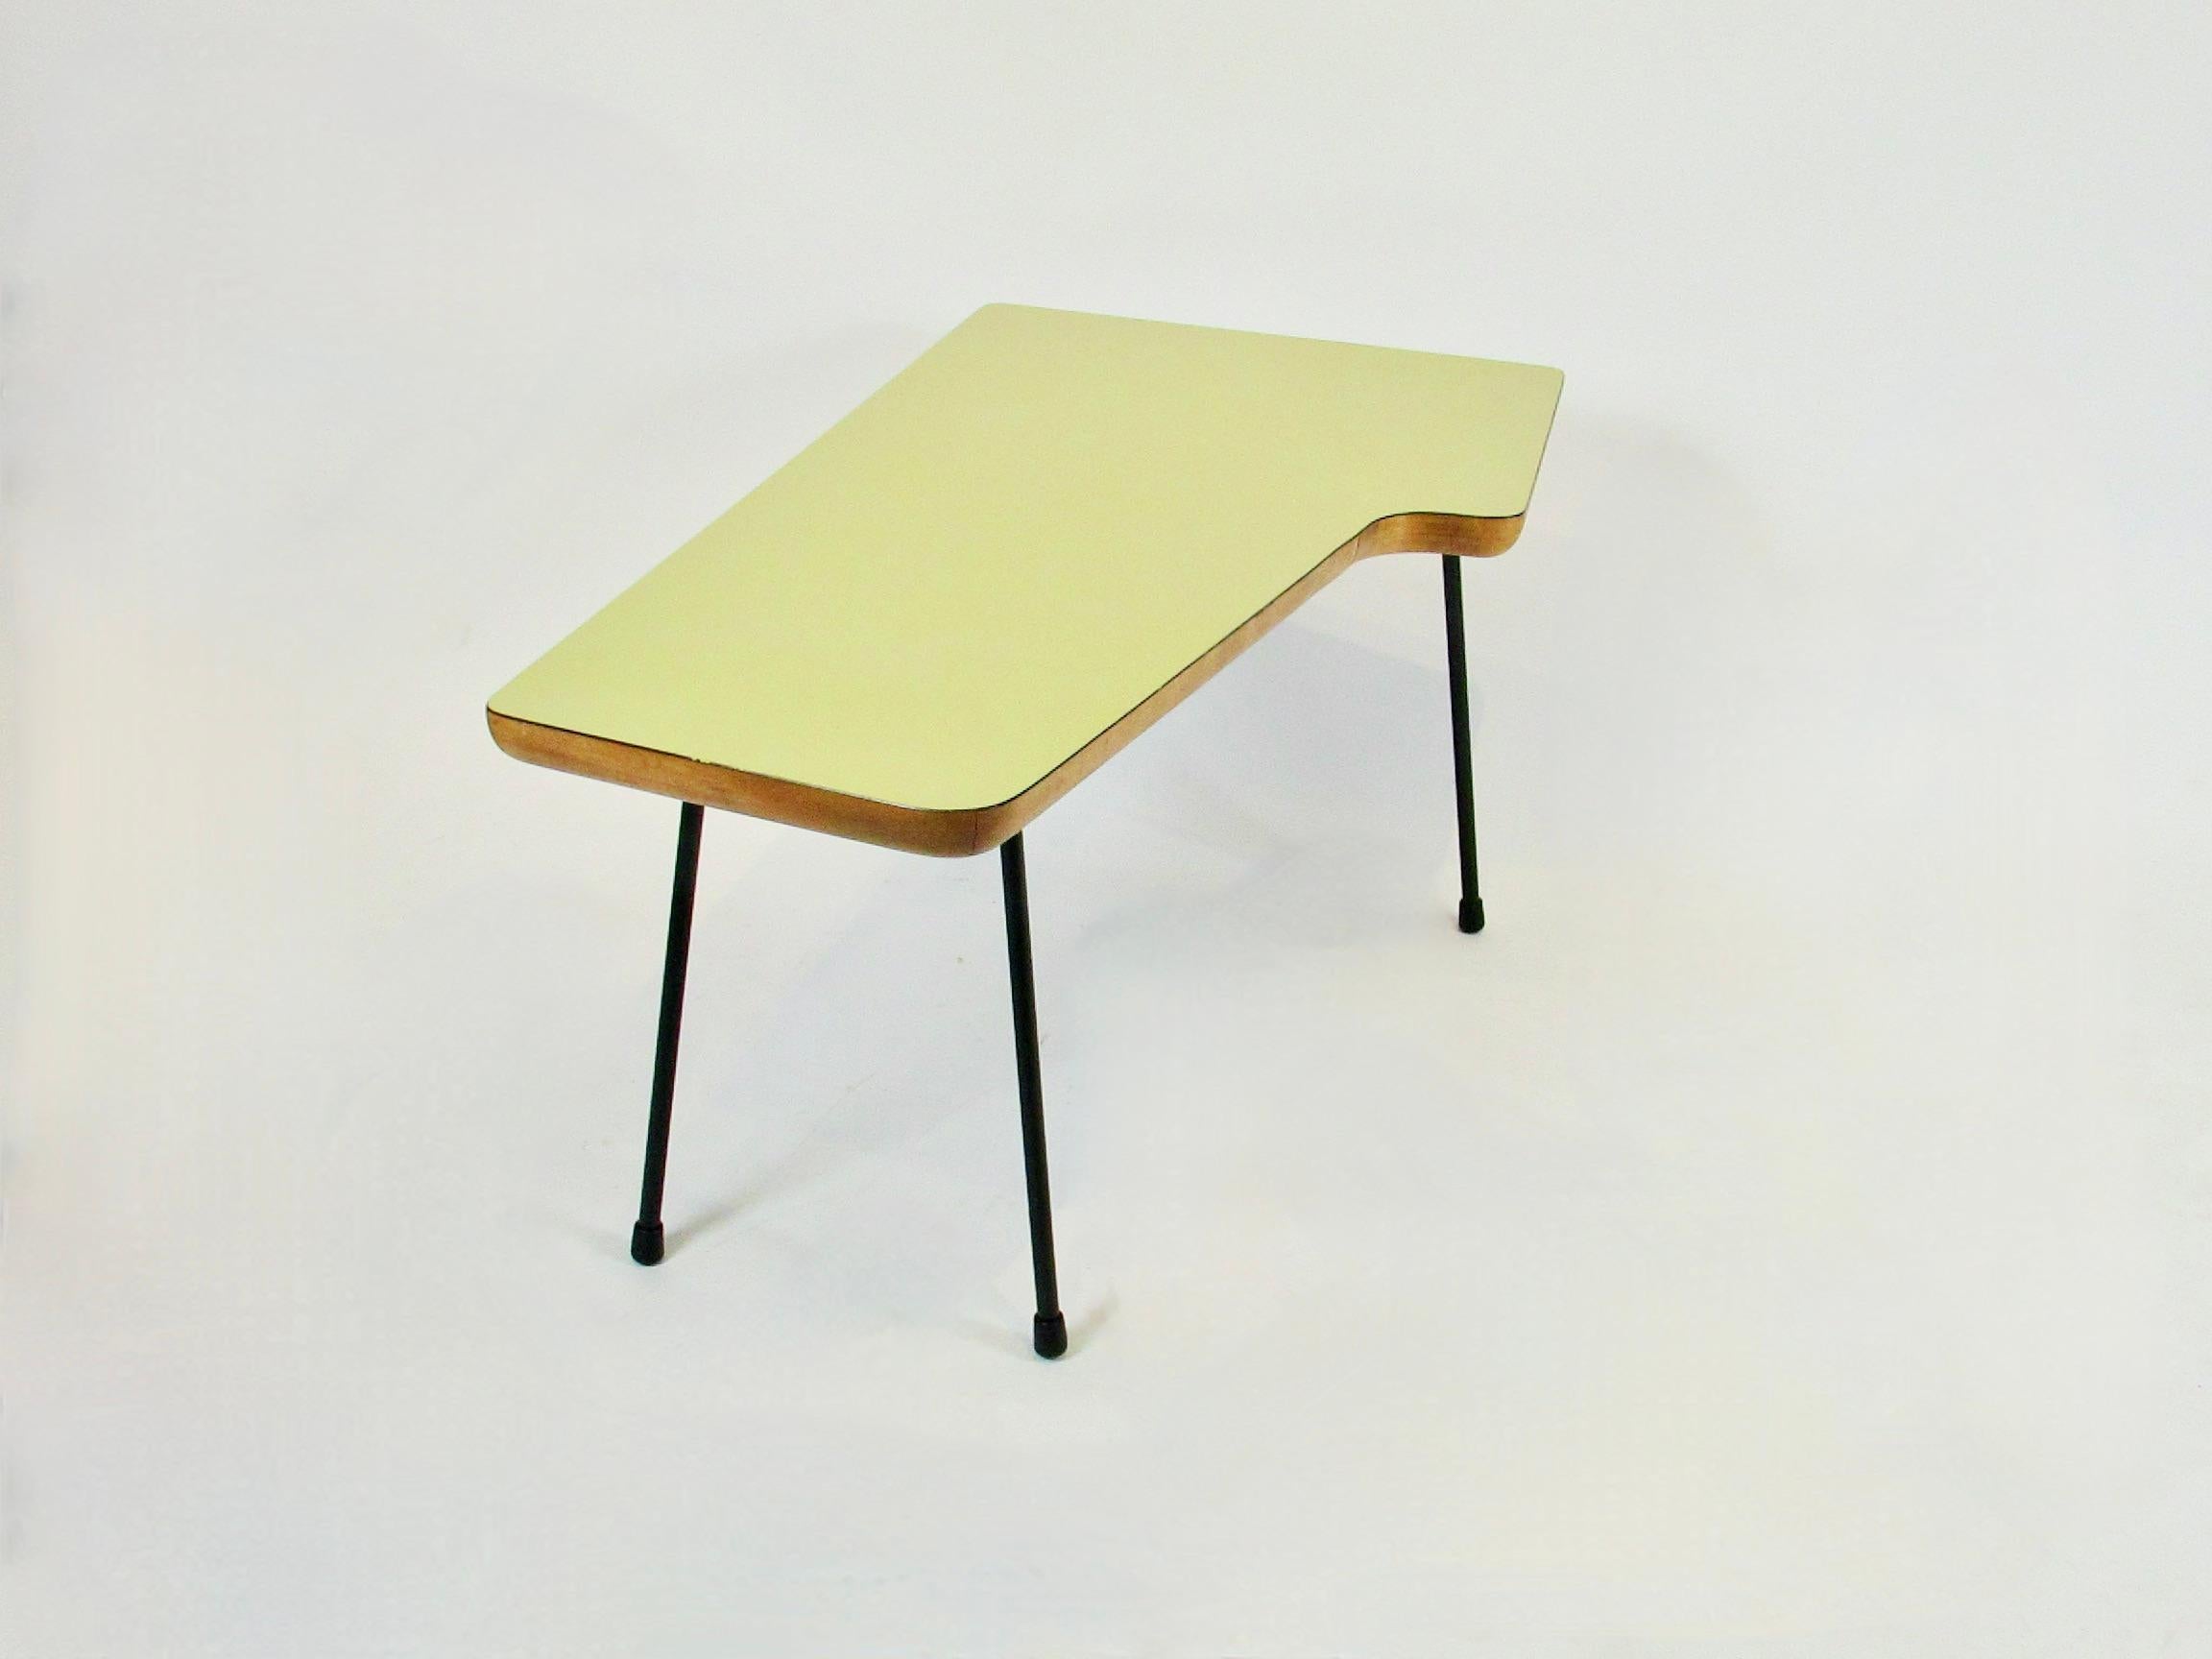 Laminated Organic Modern Occasional Table Attributed to Ray Komai and Carter Winter Studio For Sale